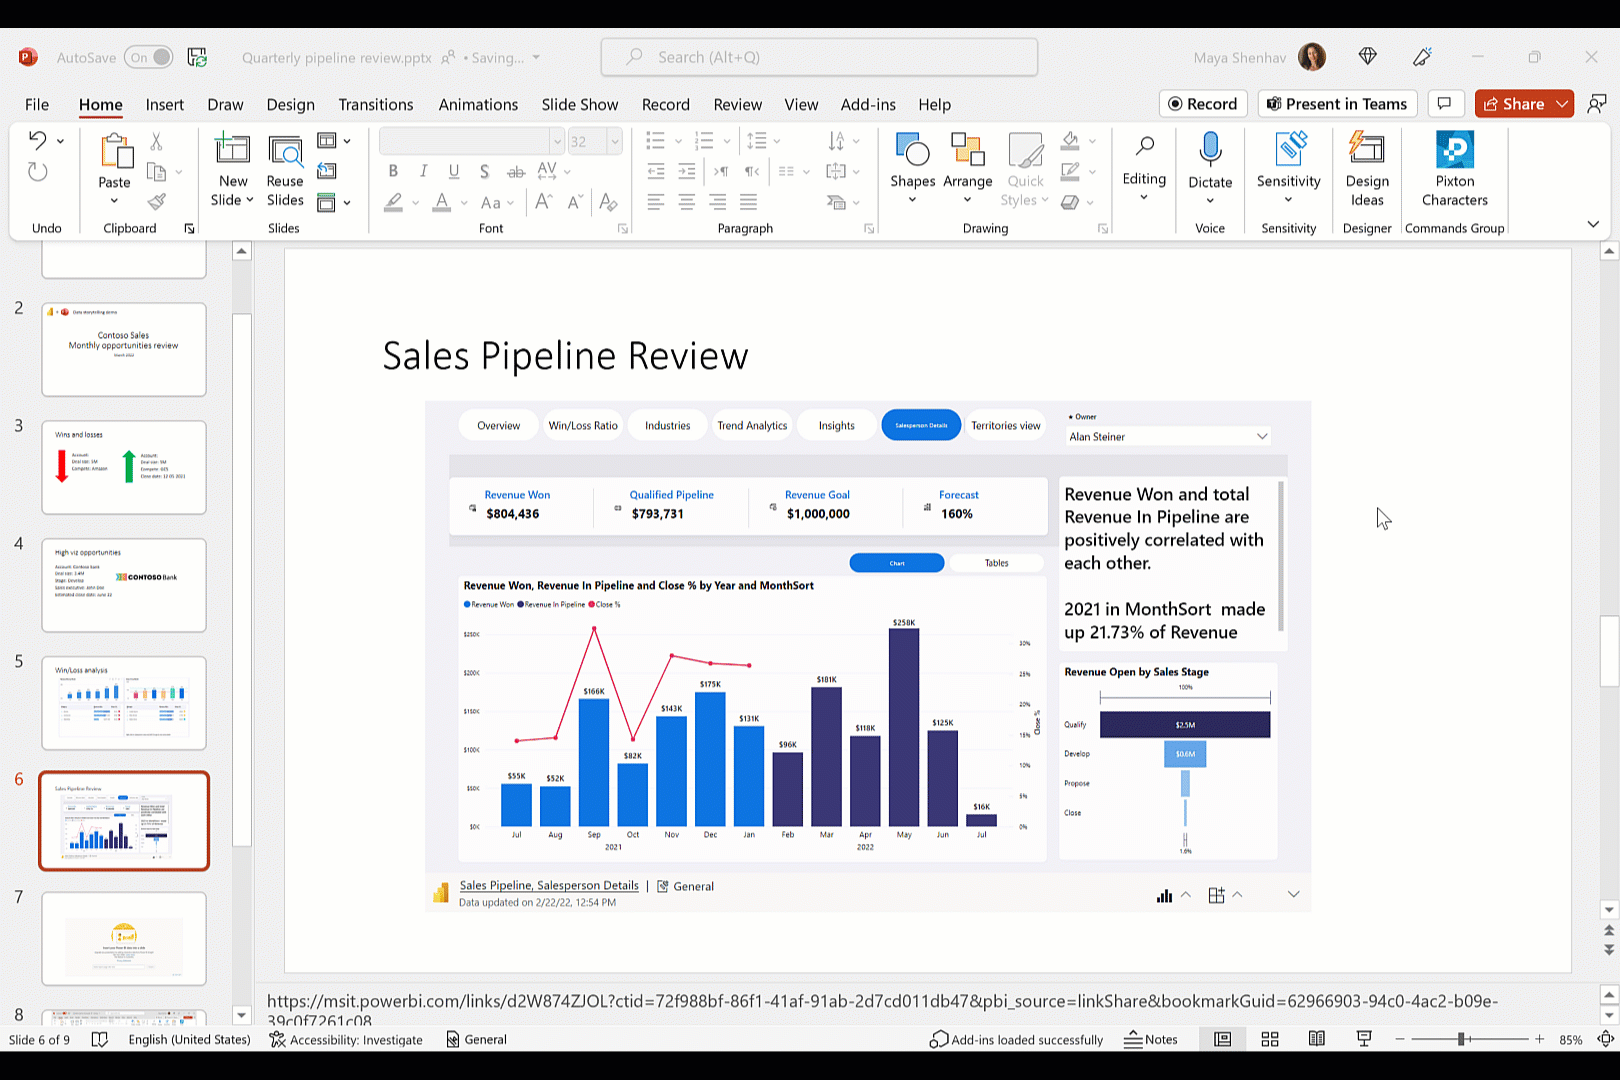 Learn How to Insert a Power BI Report in Powerpoint